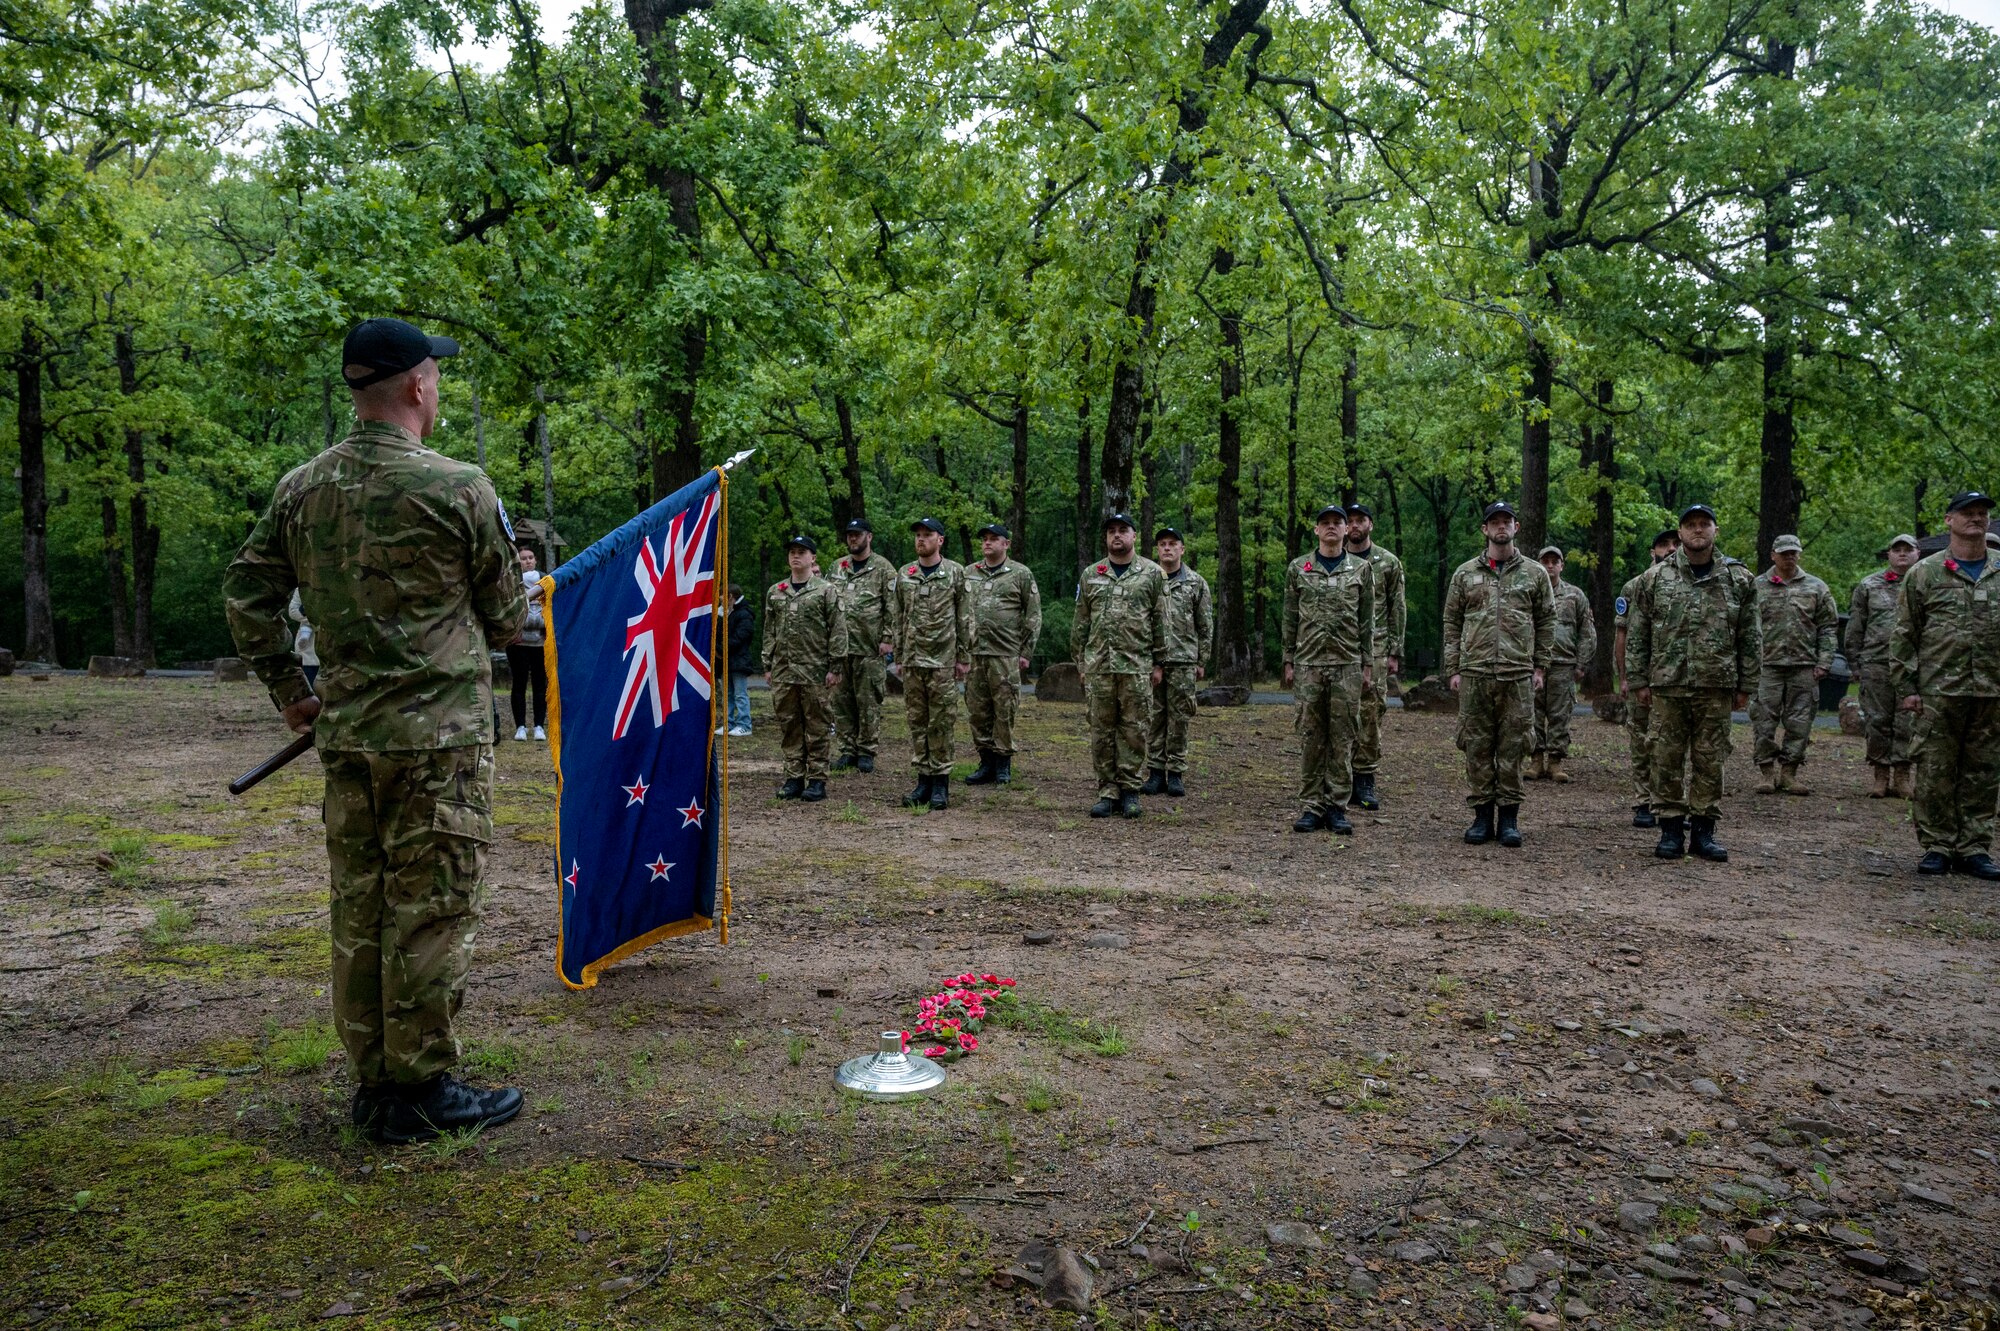 Members of the Royal New Zealand Air Force stand in formation and present the New Zealand flag